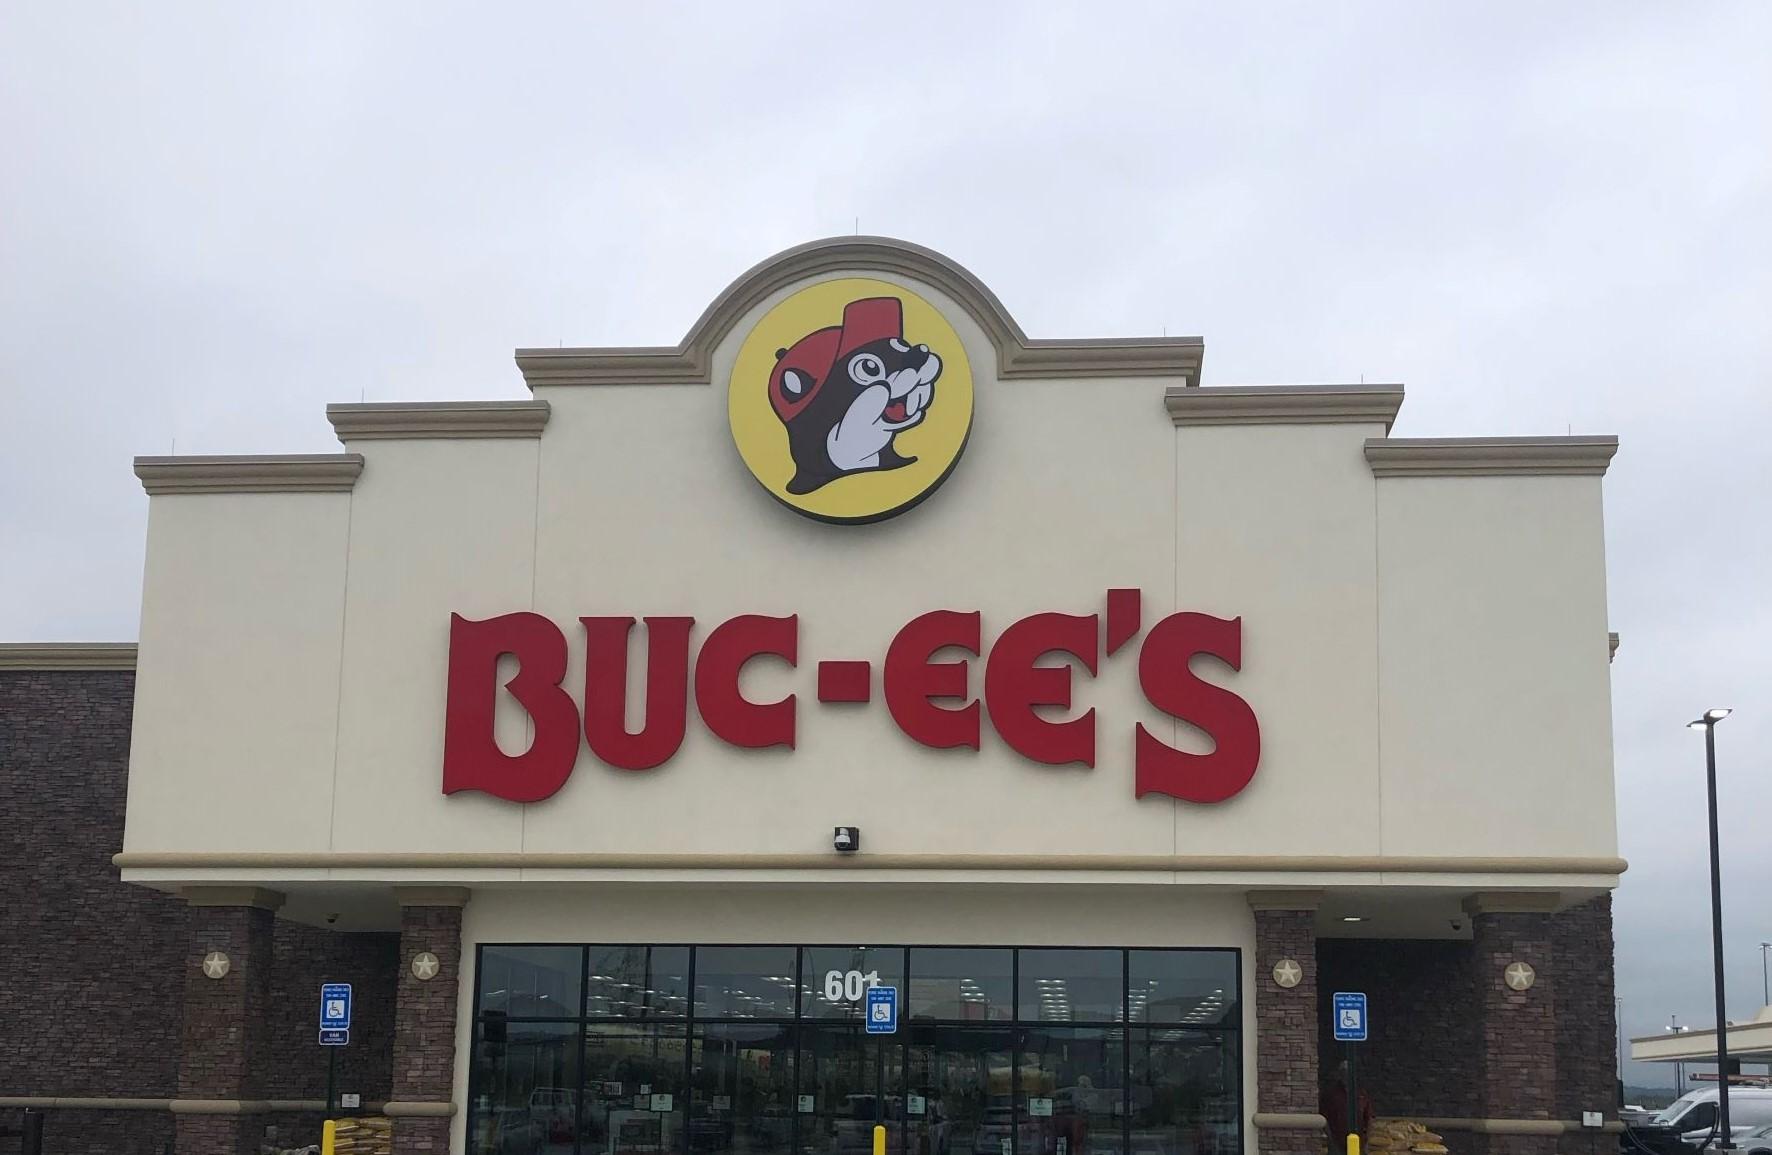 I Survived: A Trip to Buc-ee's